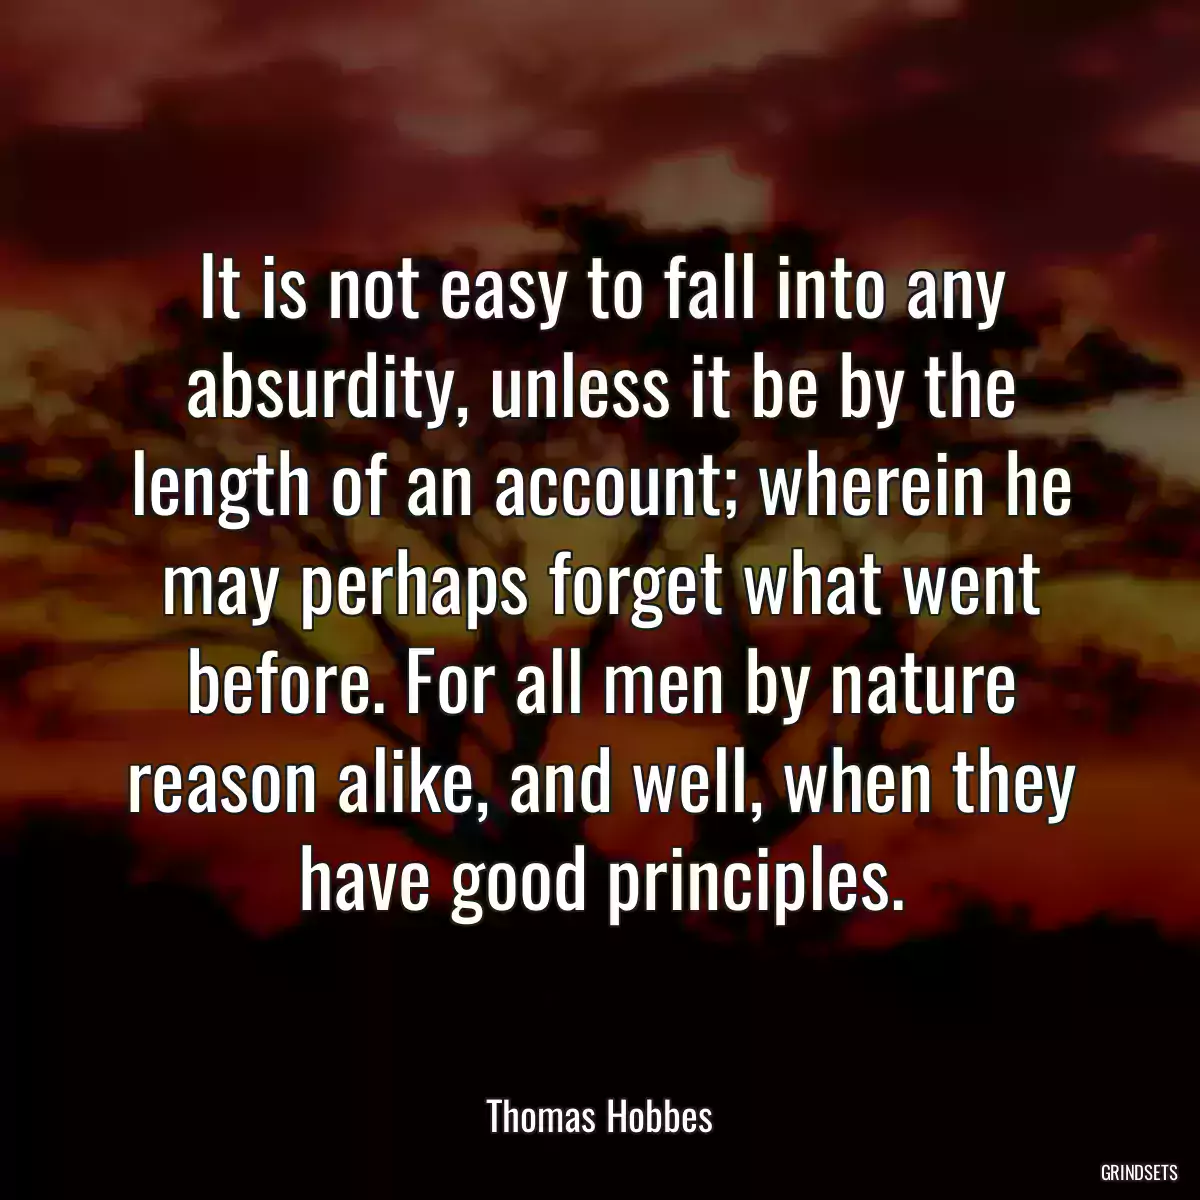 It is not easy to fall into any absurdity, unless it be by the length of an account; wherein he may perhaps forget what went before. For all men by nature reason alike, and well, when they have good principles.